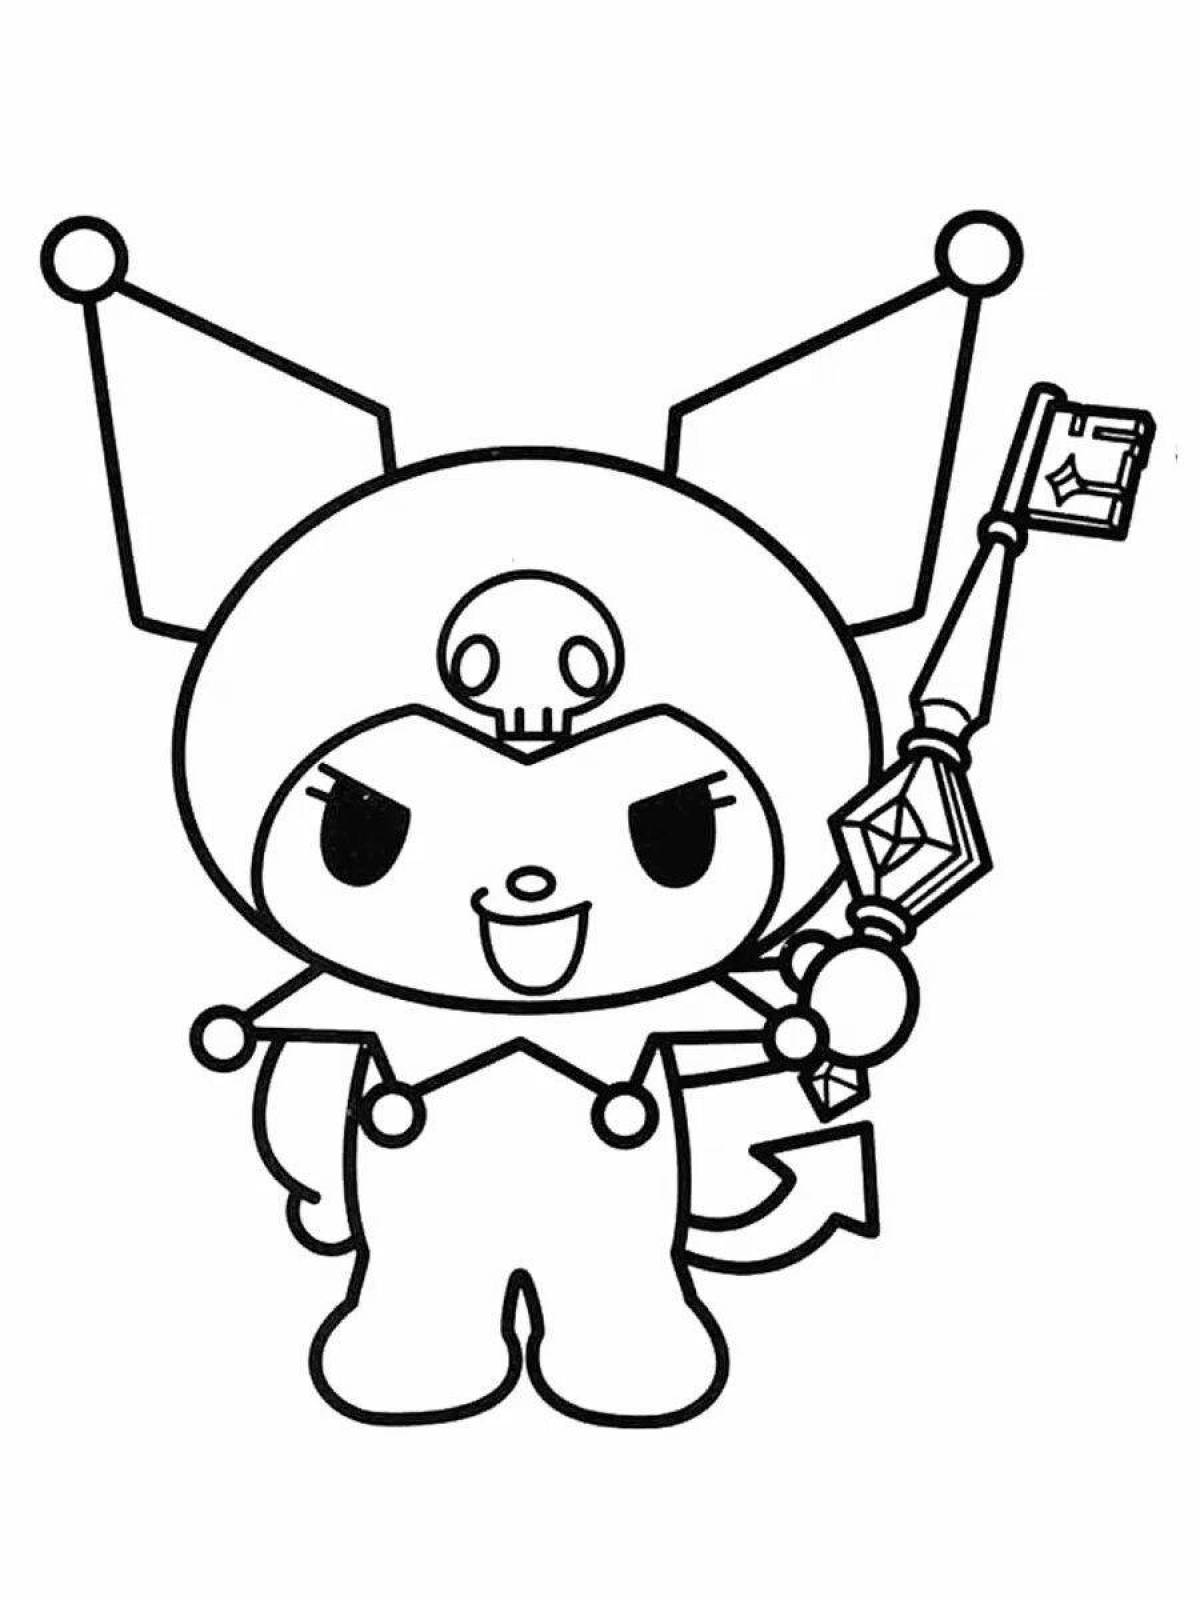 Kuromi's adorable face coloring page